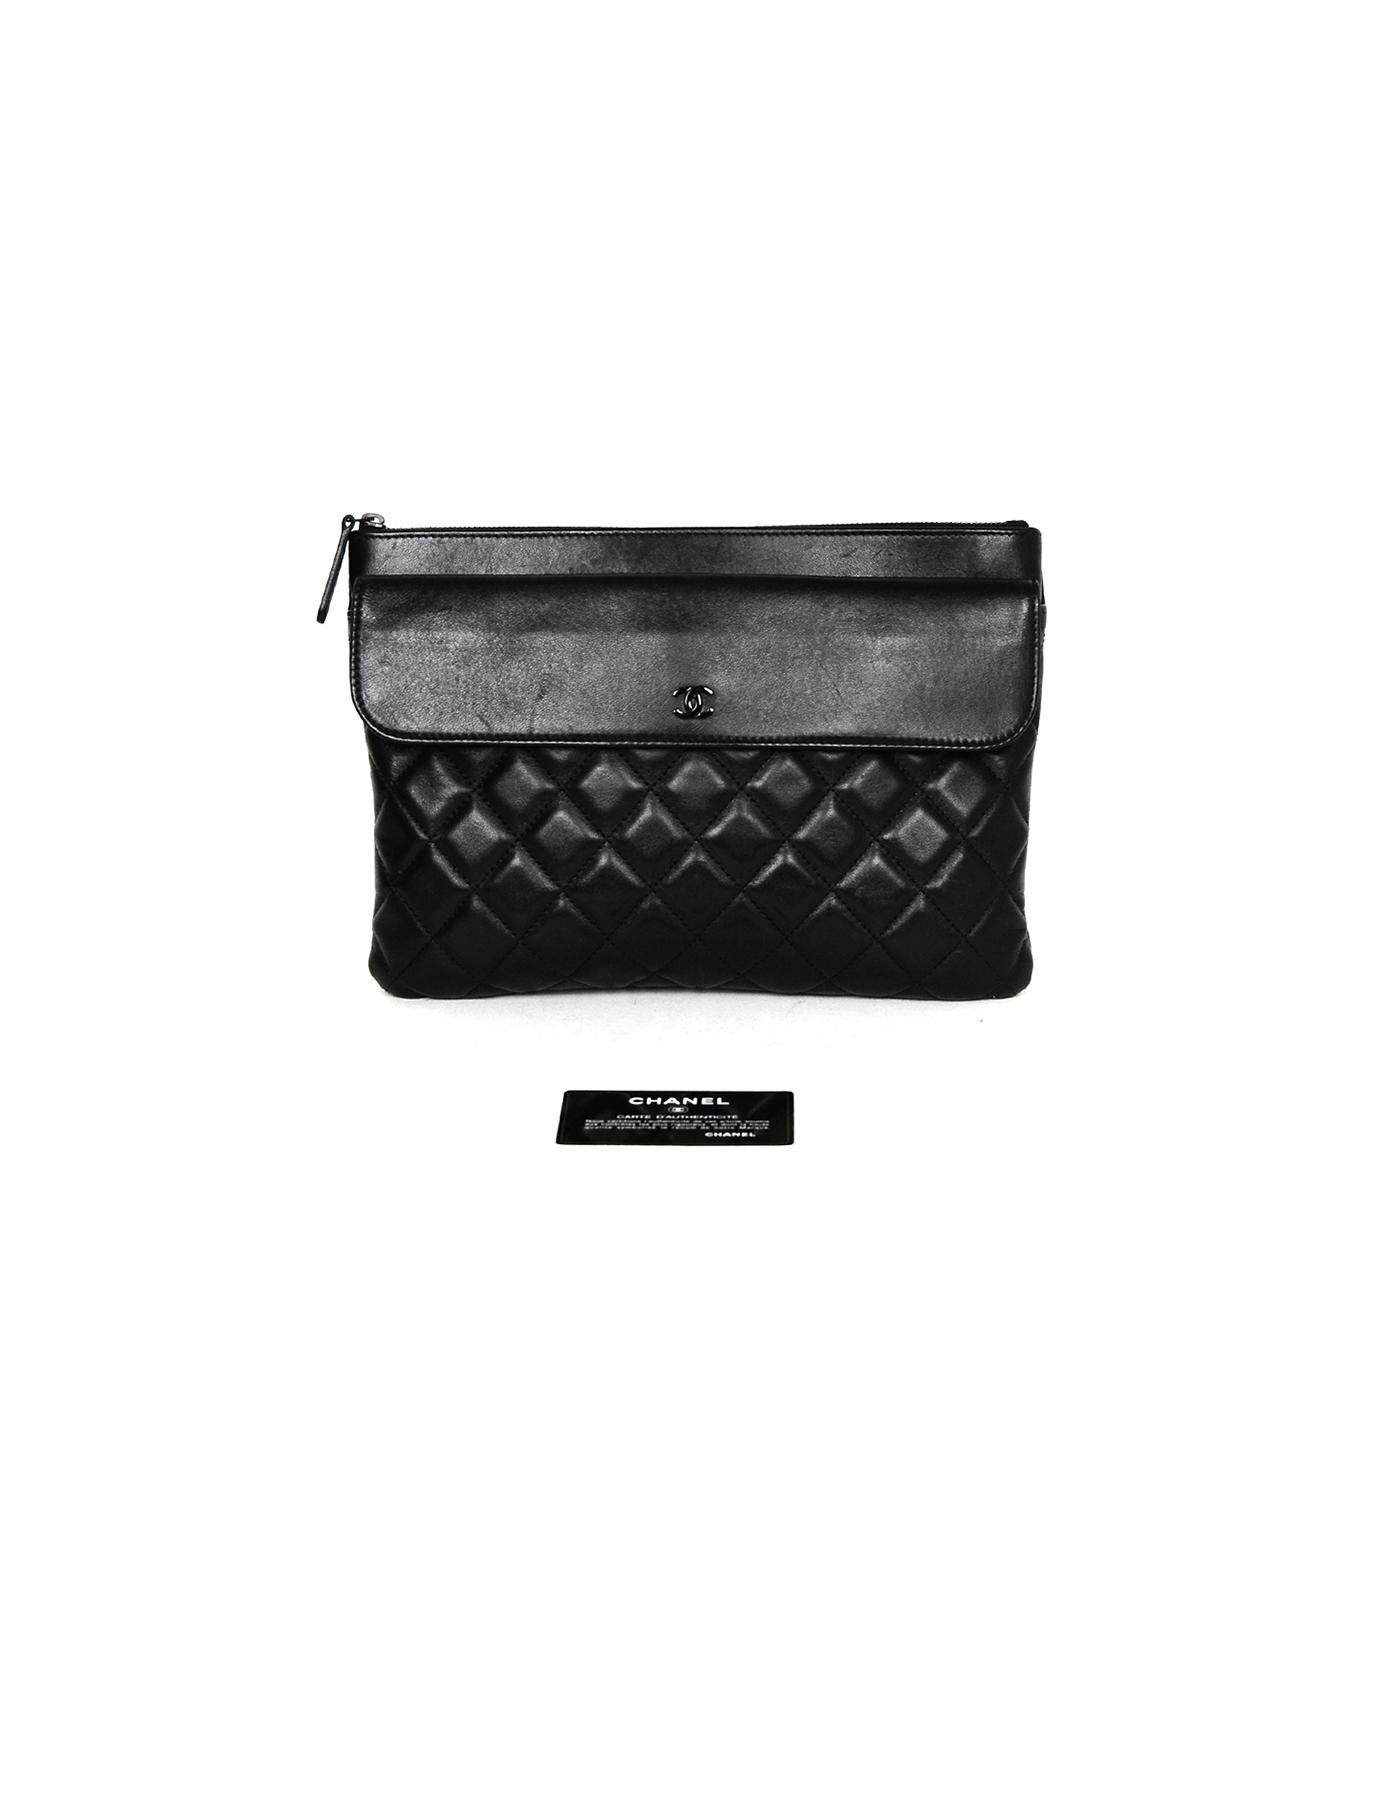 Chanel SO Black Lambskin Leather Quilted Pouch/Clutch Bag 7